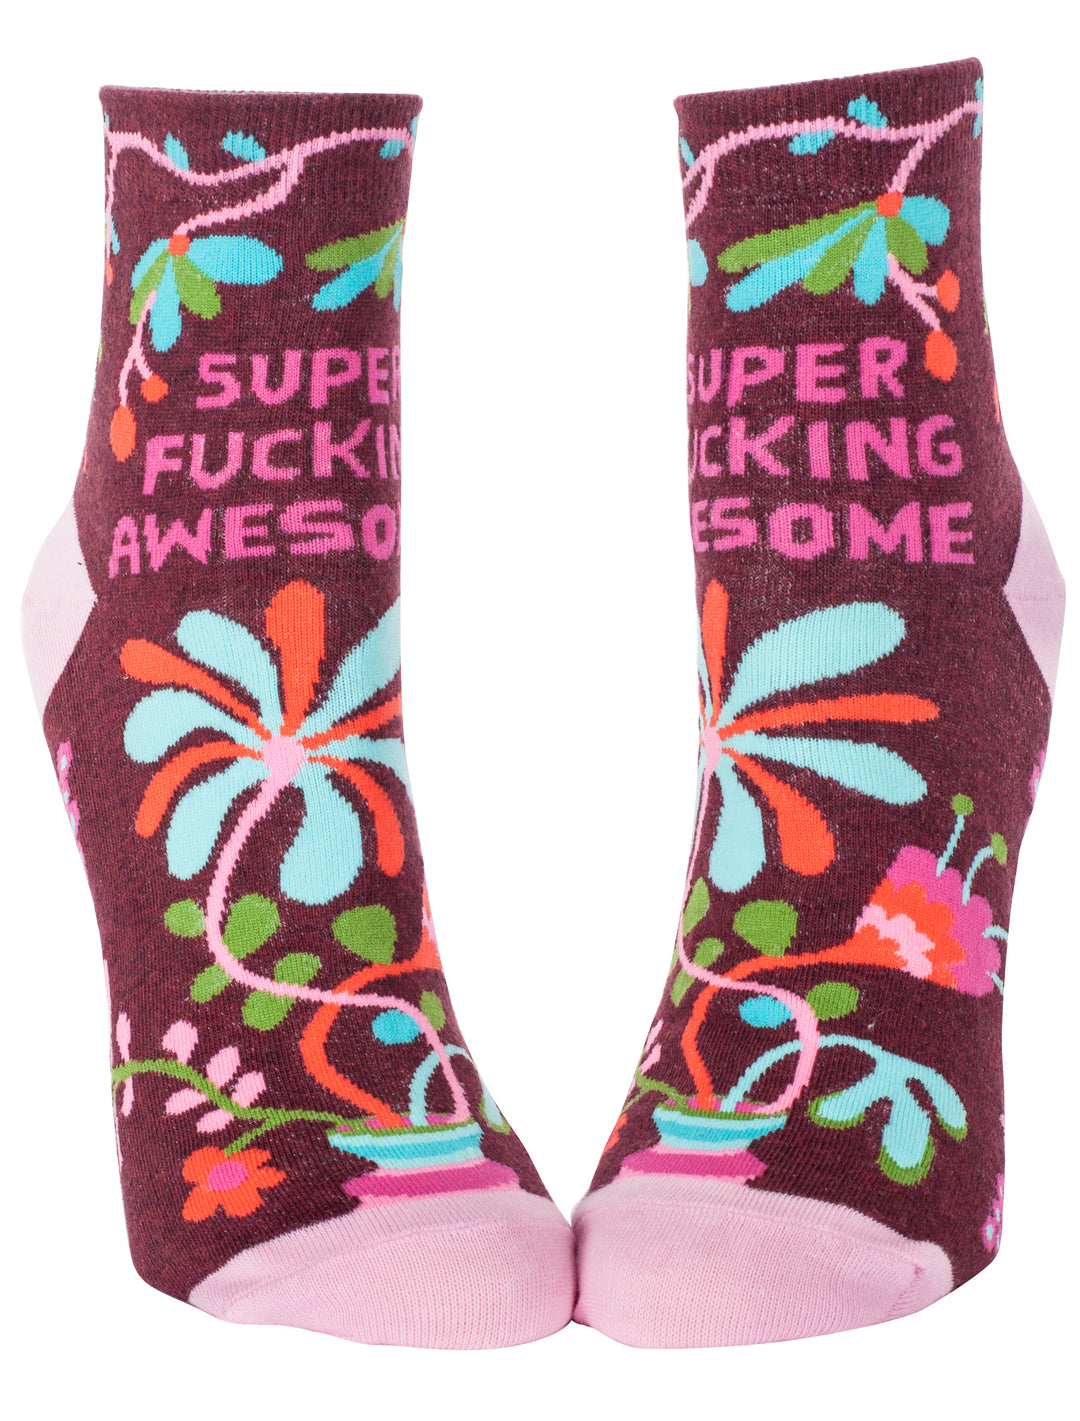 Blue Q Super fucking awesome Women's Ankle Sock